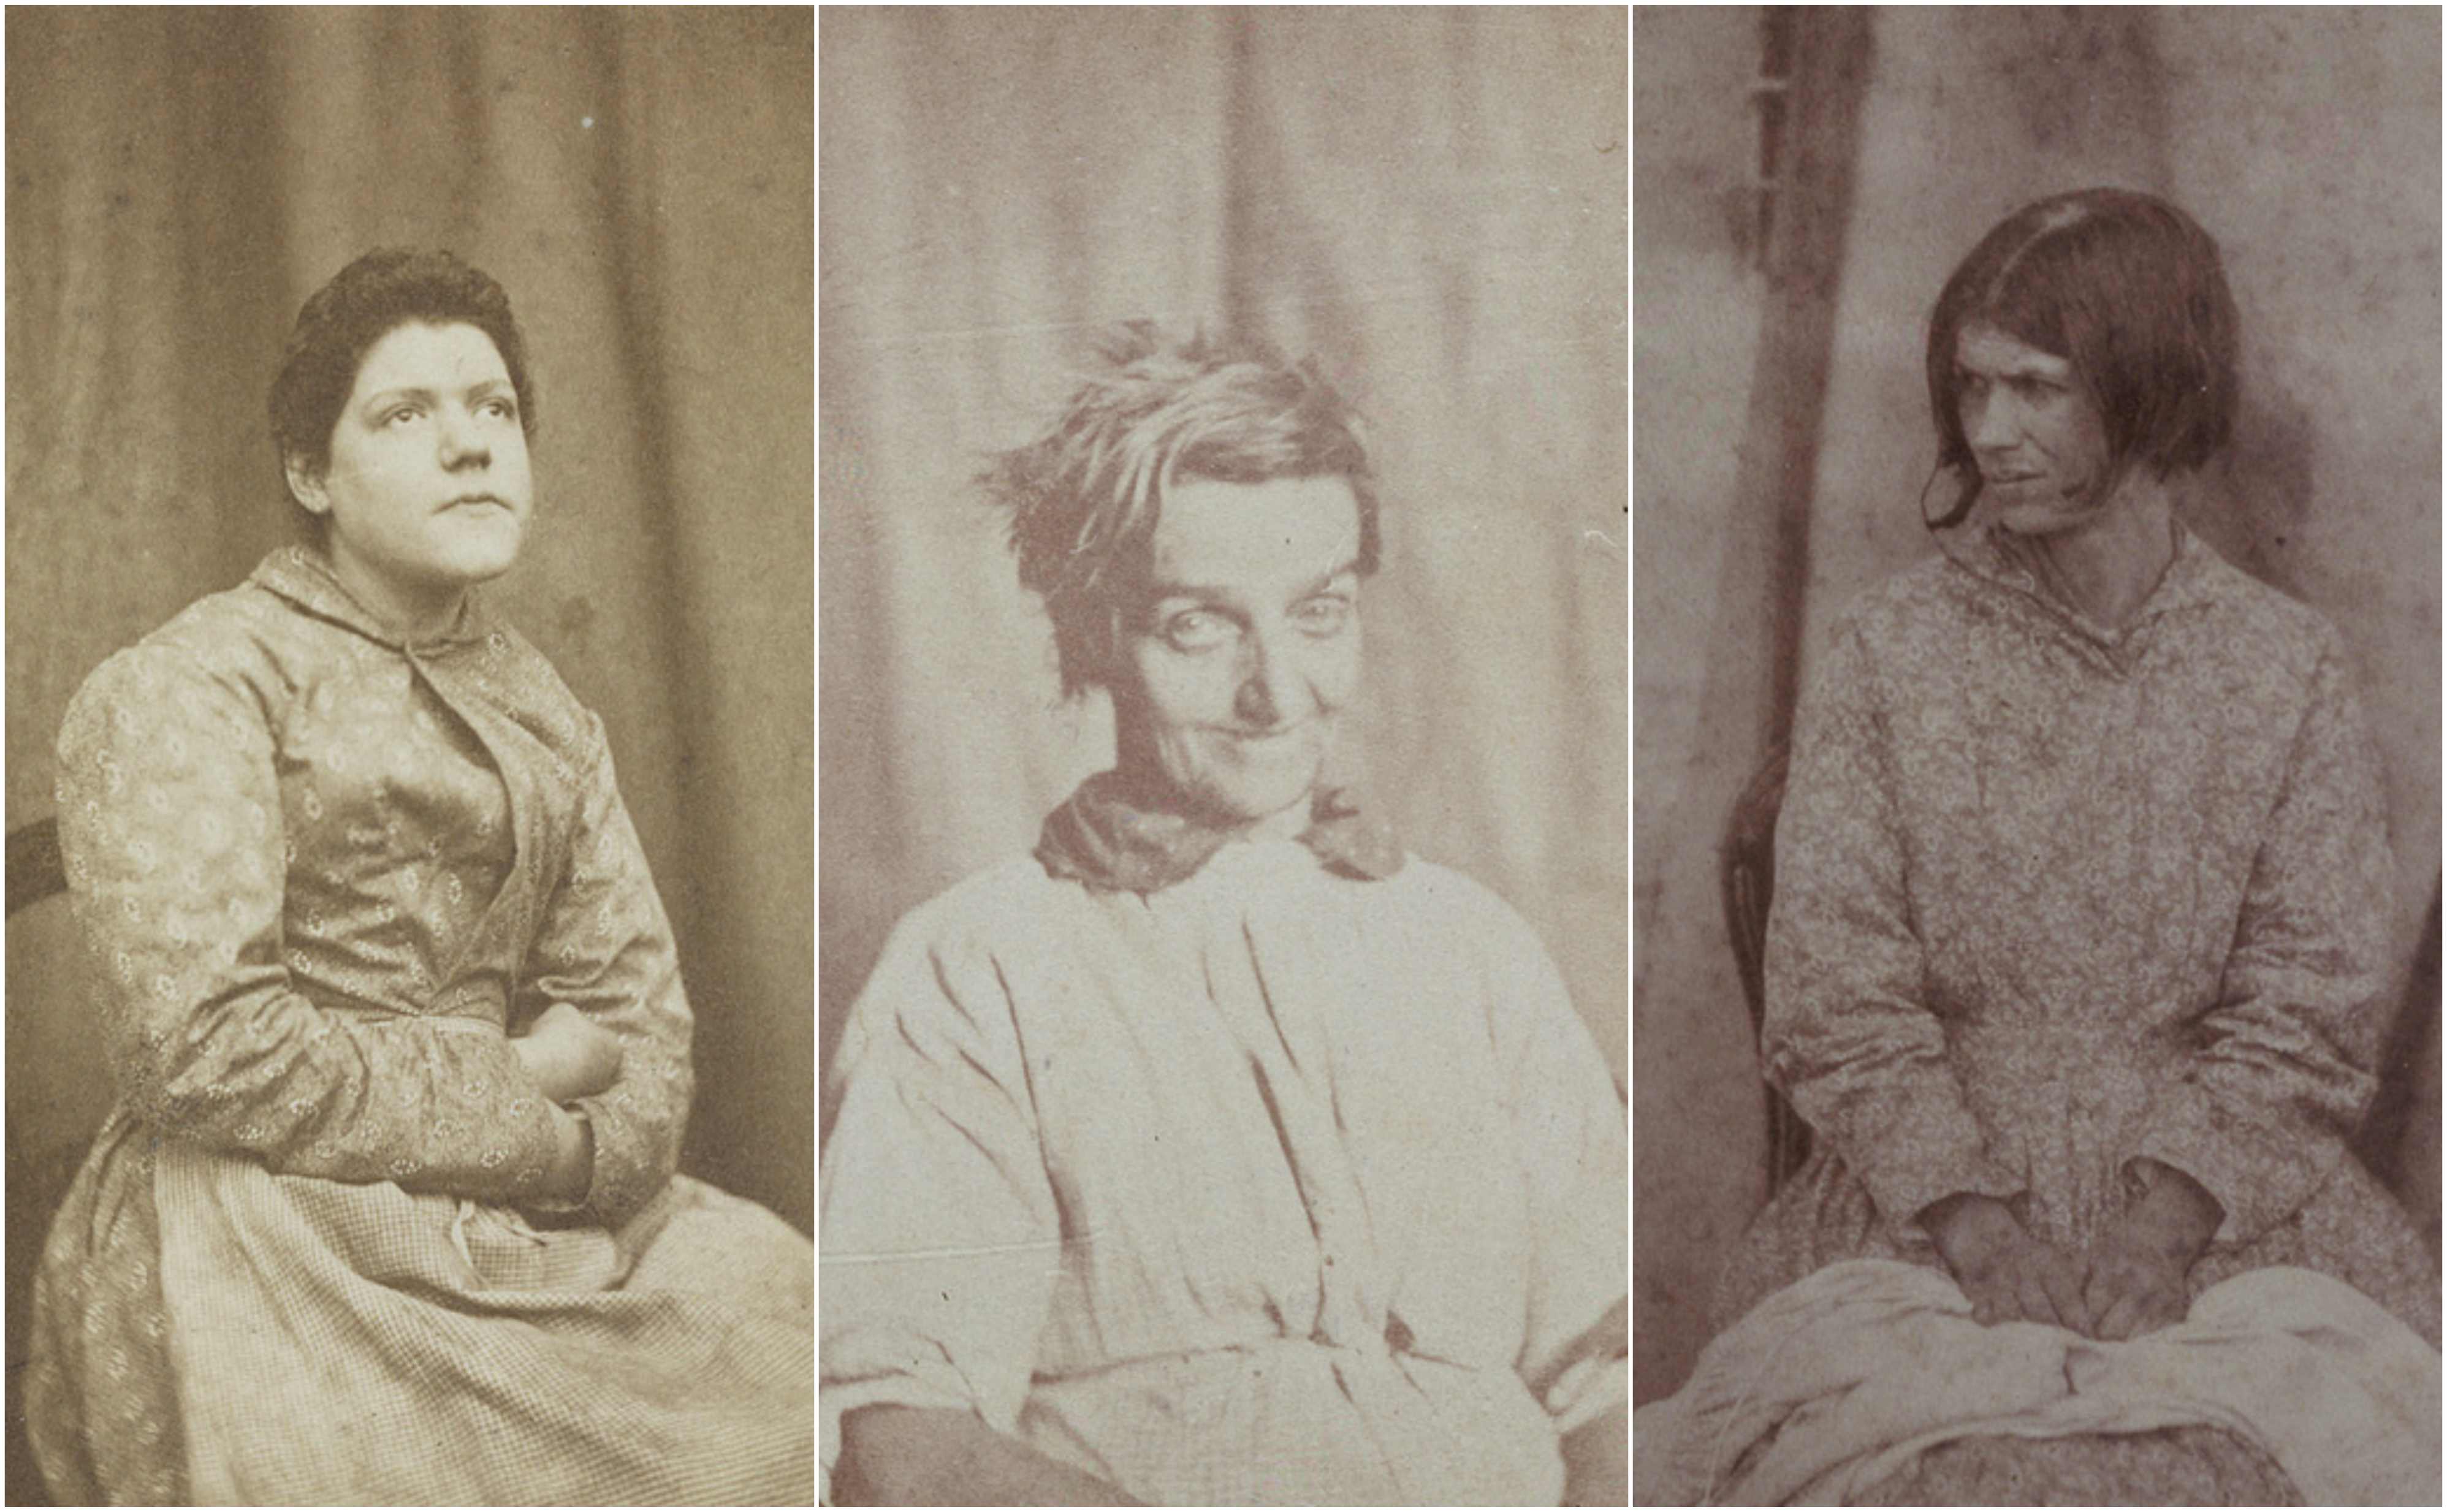 #picturethis: Photos of female asylum patients by a Victorian psychiatrist